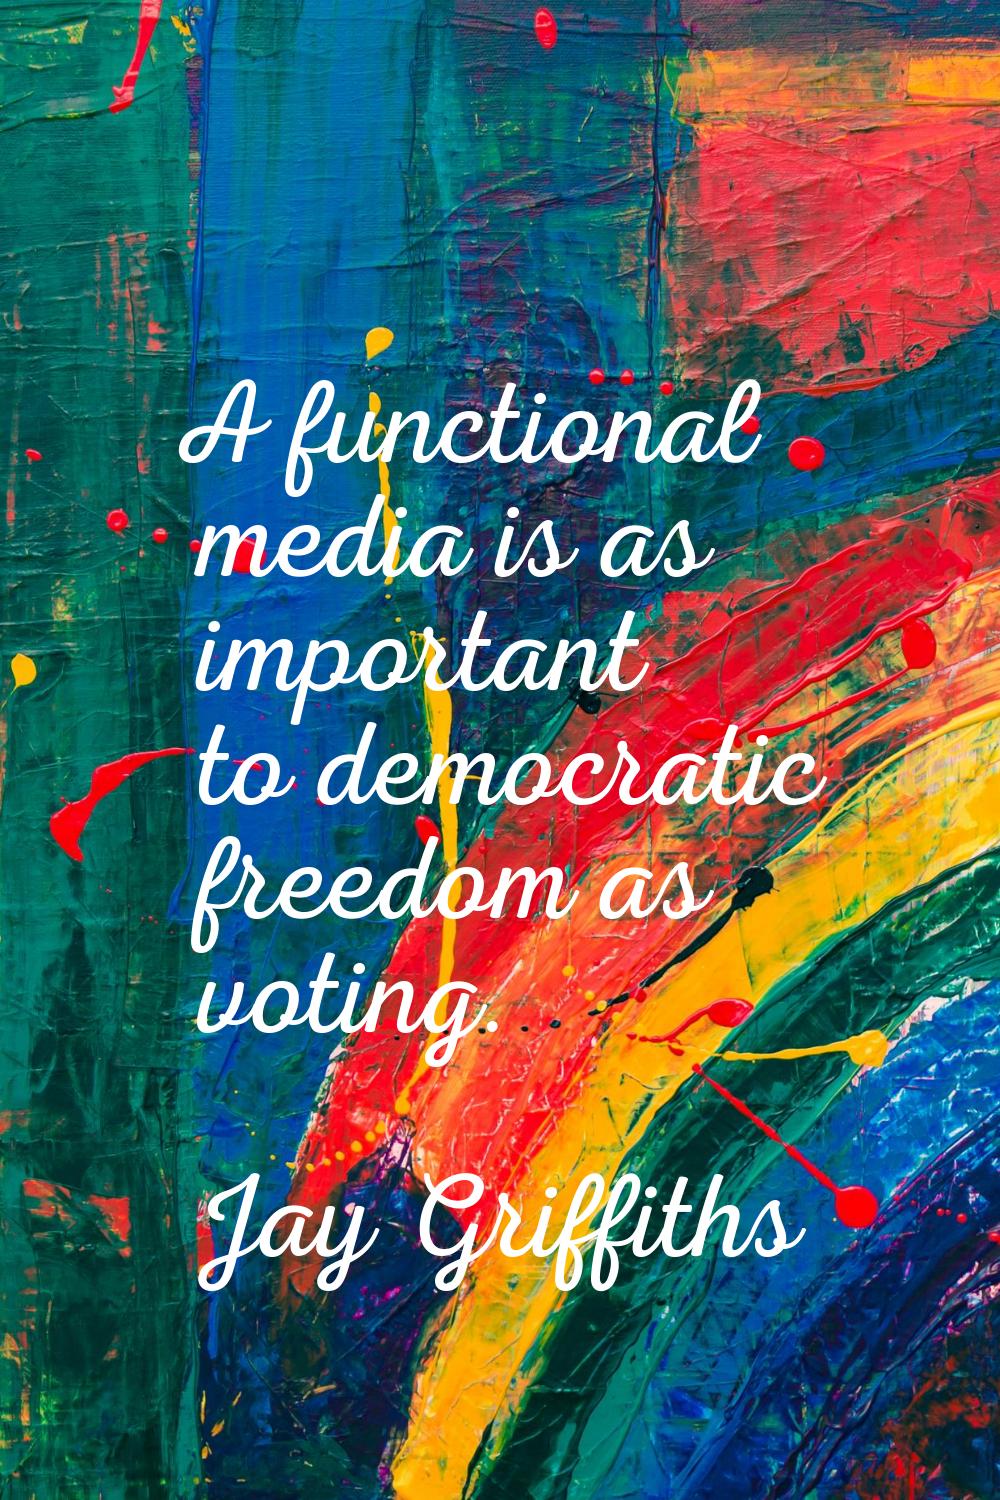 A functional media is as important to democratic freedom as voting.